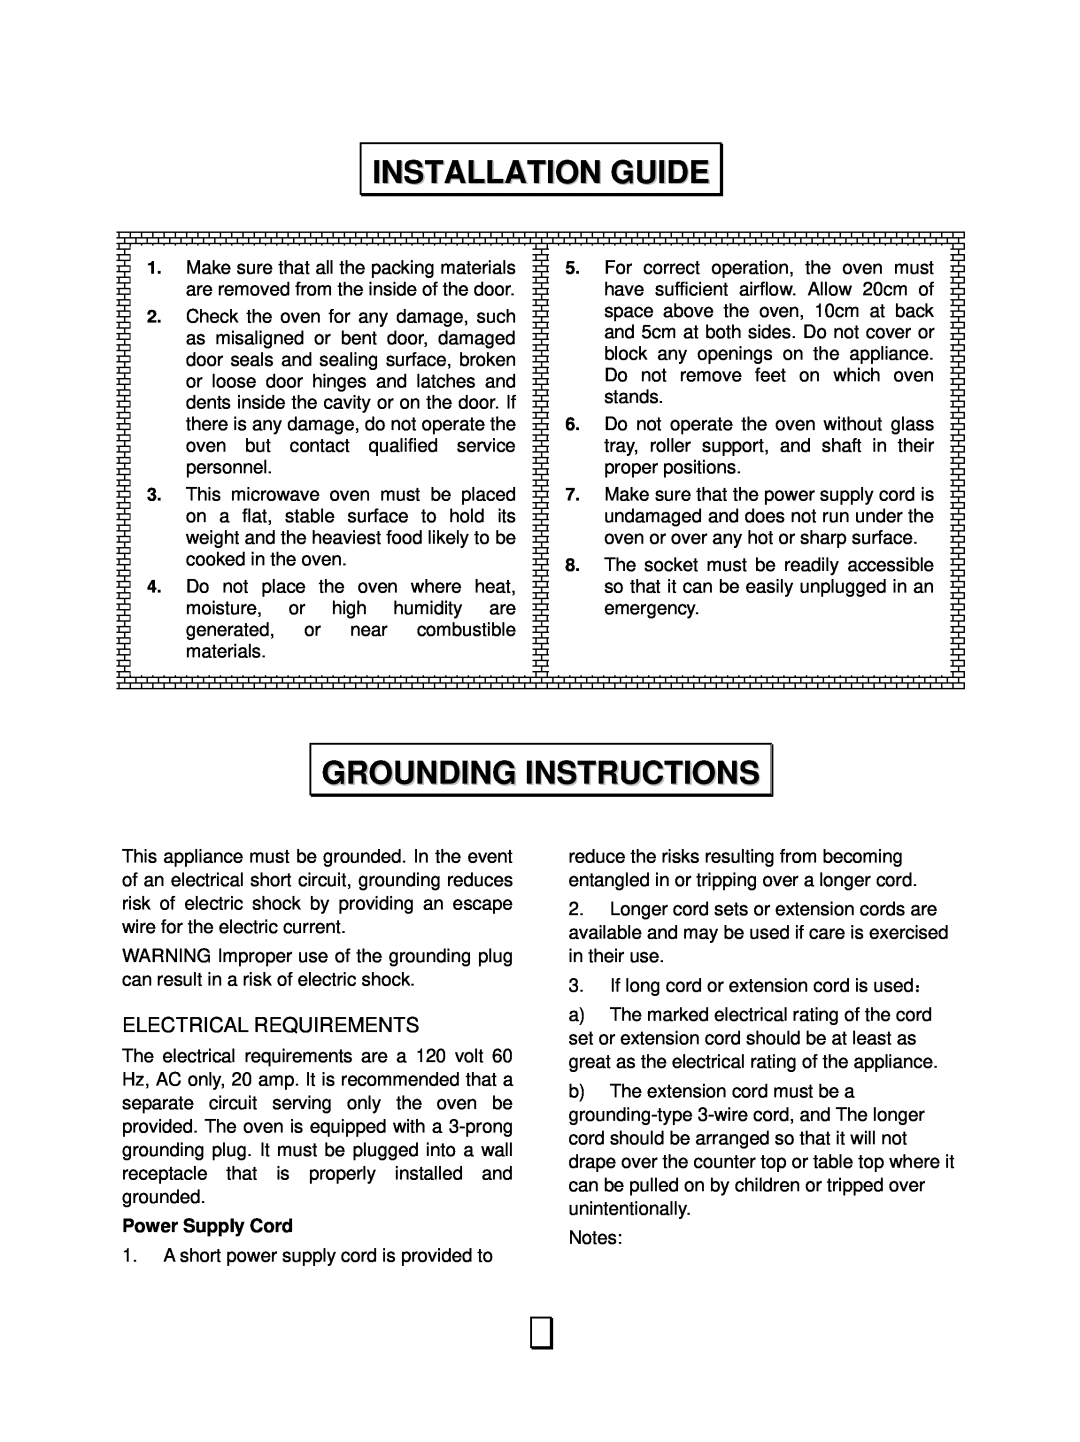 RCA RMW1143 owner manual Installation Guide, Grounding Instructions, Electrical Requirements 